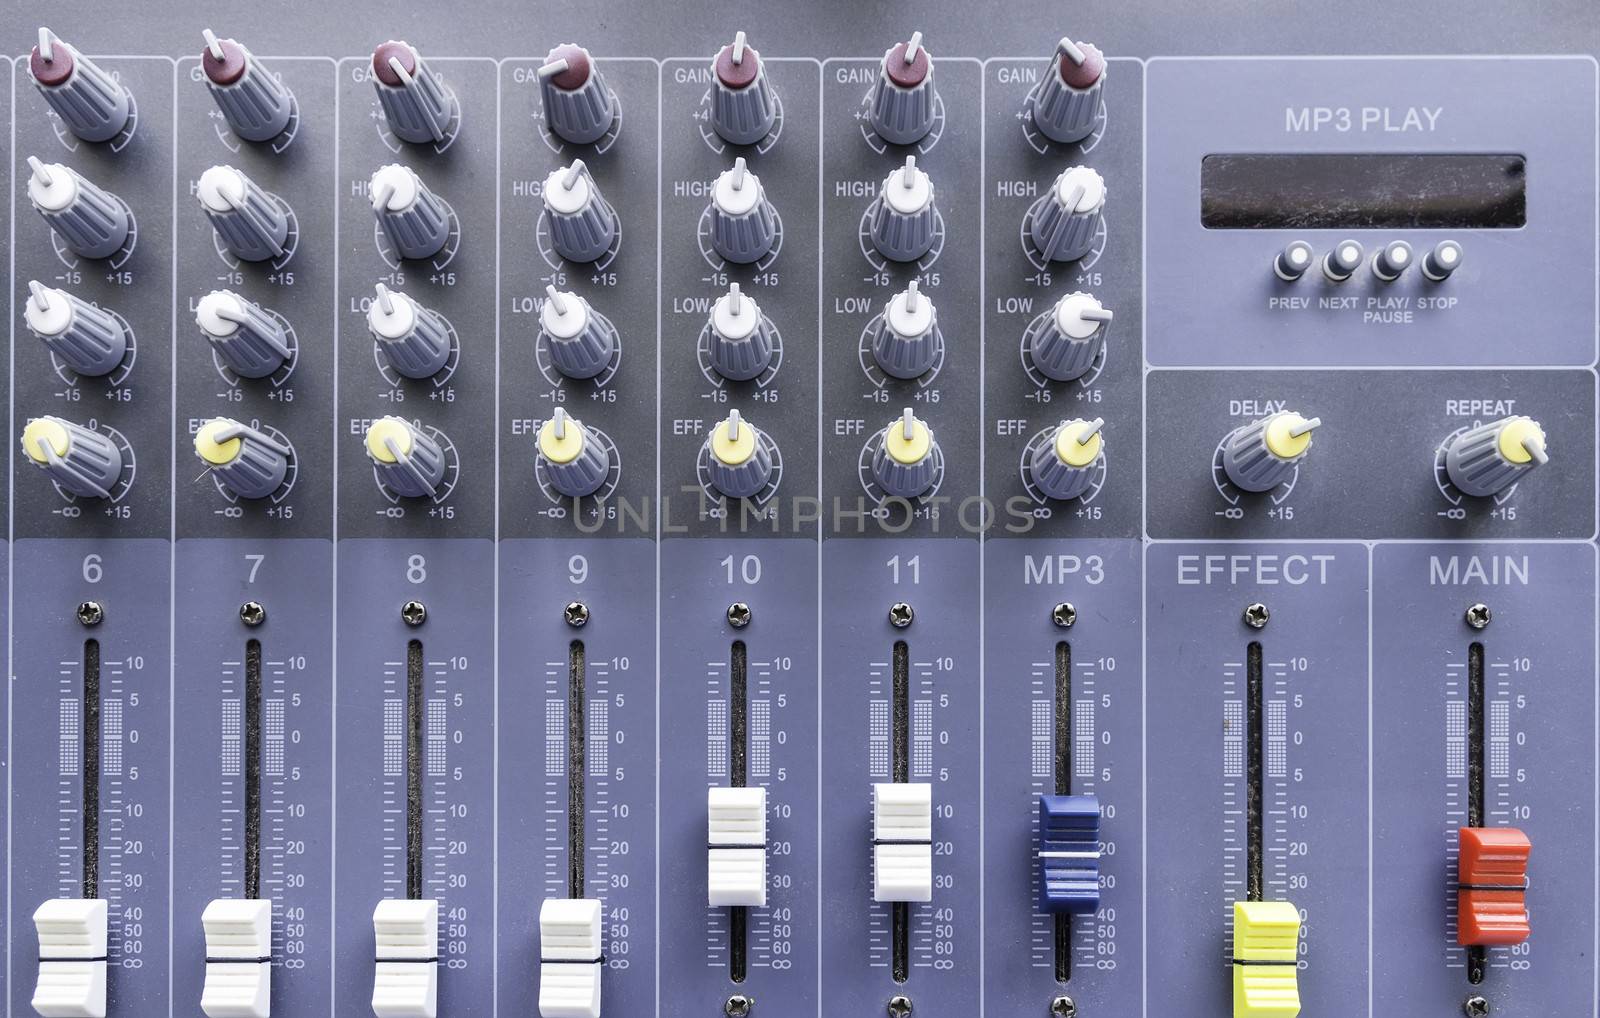 sliders of a mixing console. It is used for audio signals modifications